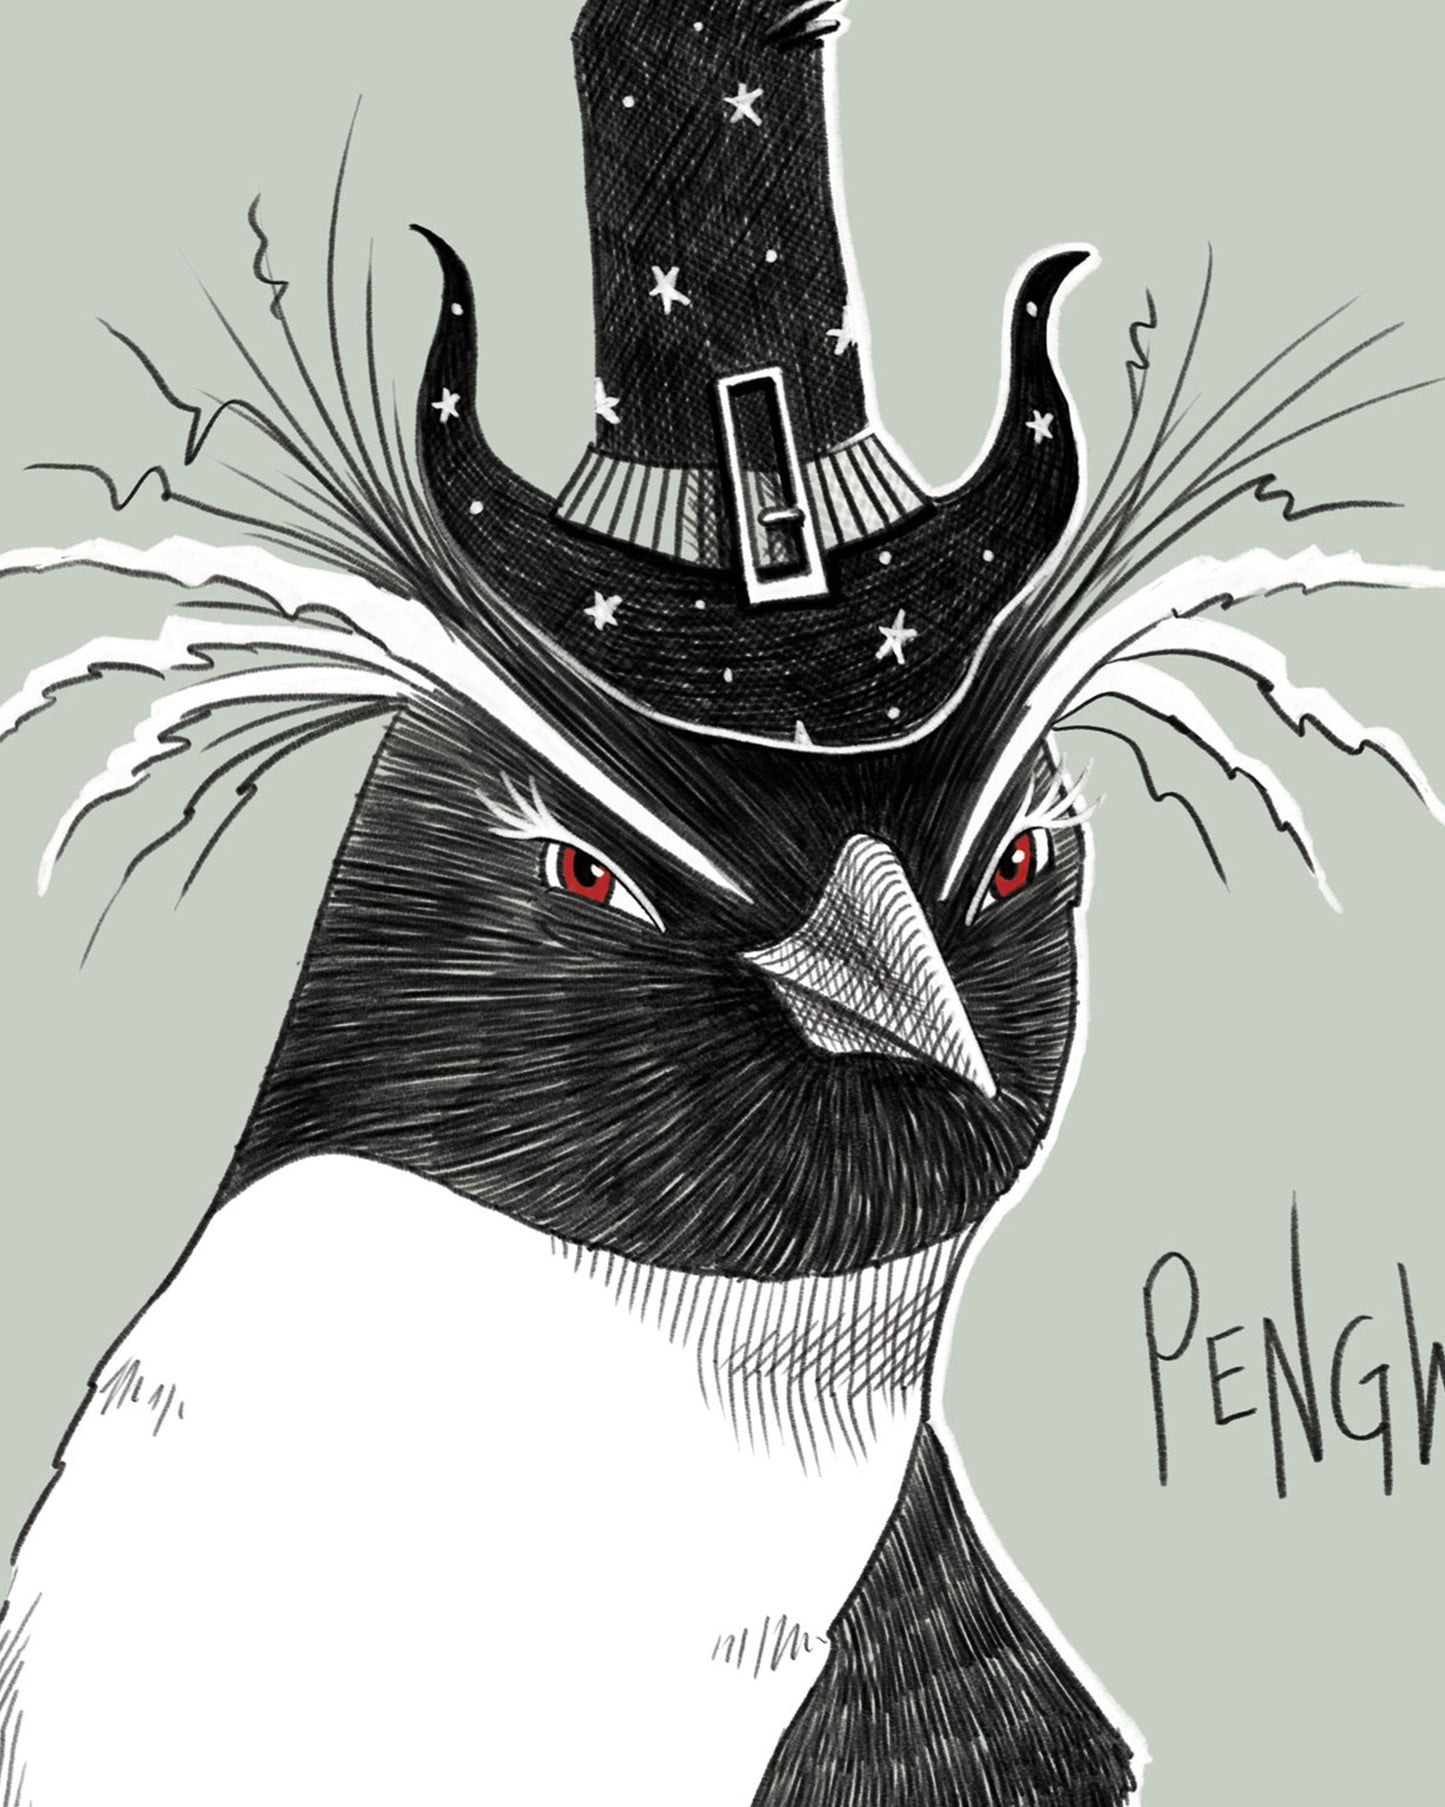 Pengwitch Print